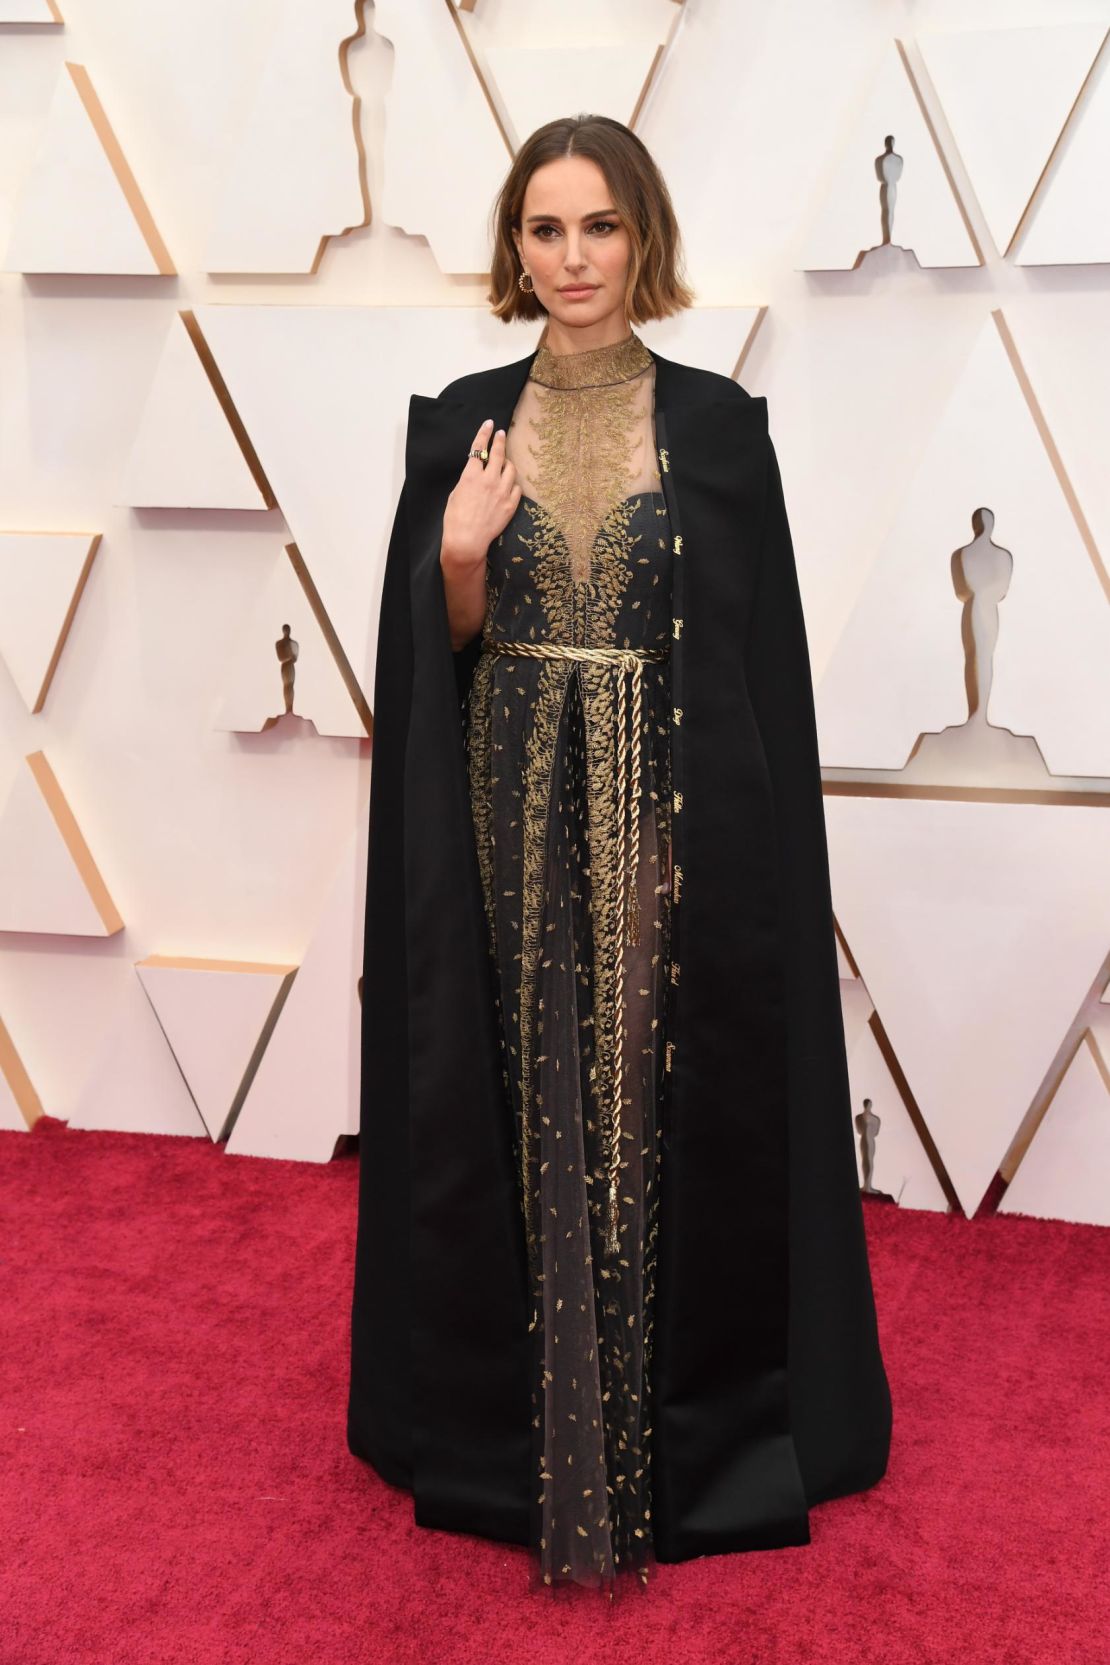 Oscars fashion: Modern, dressed up power suits outshine princess gowns